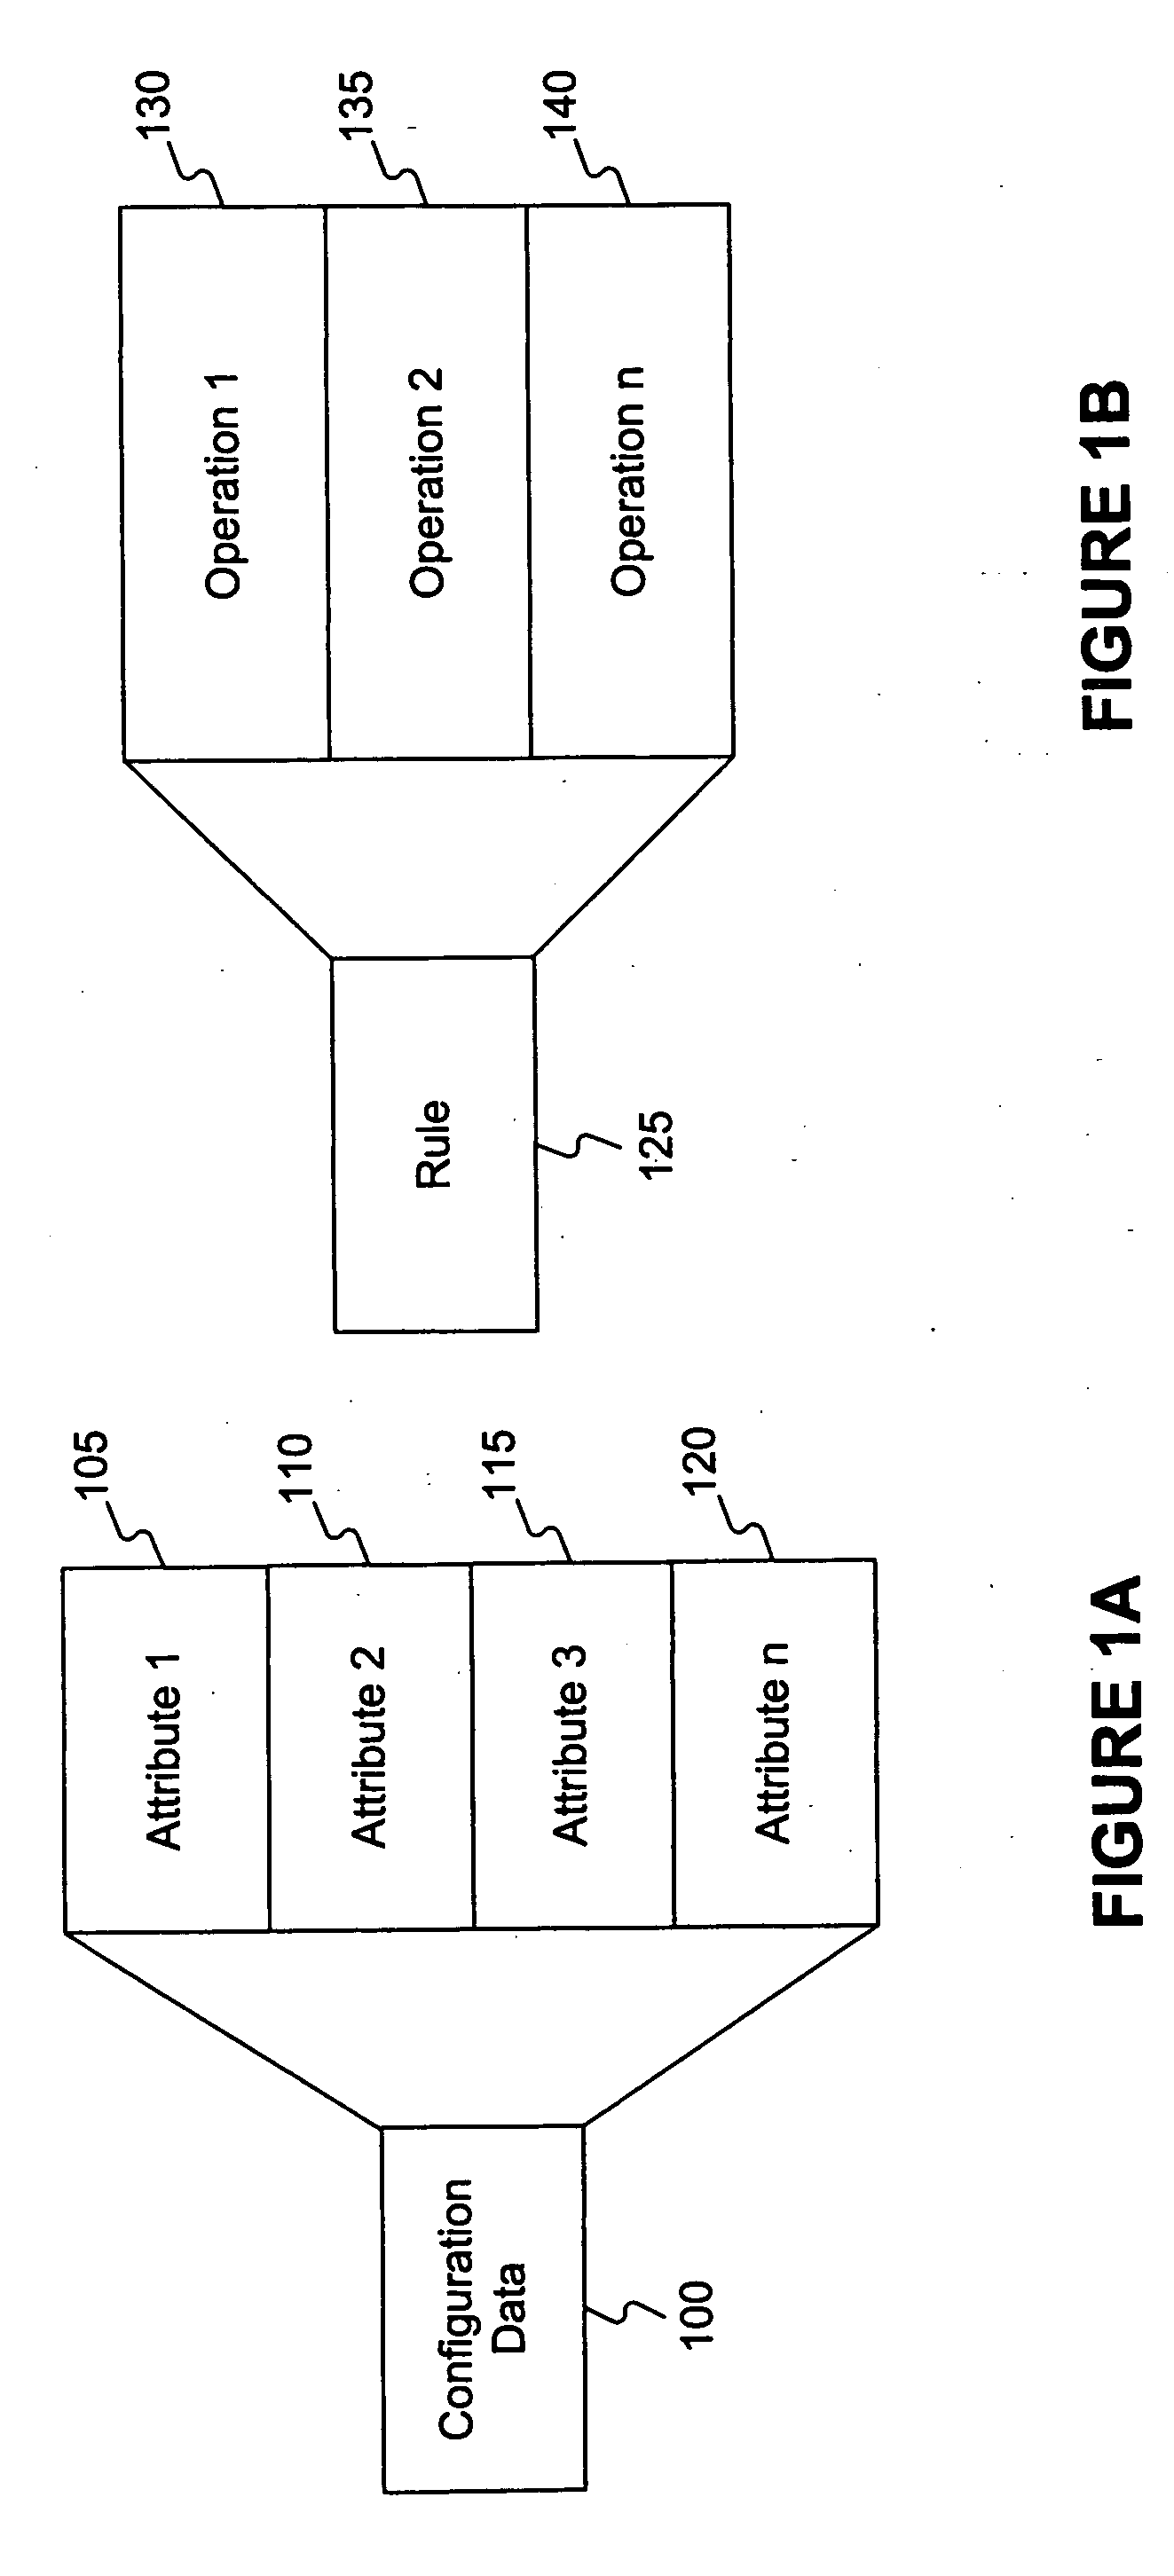 Methods of exposing a missing collection of application elements as deprecated